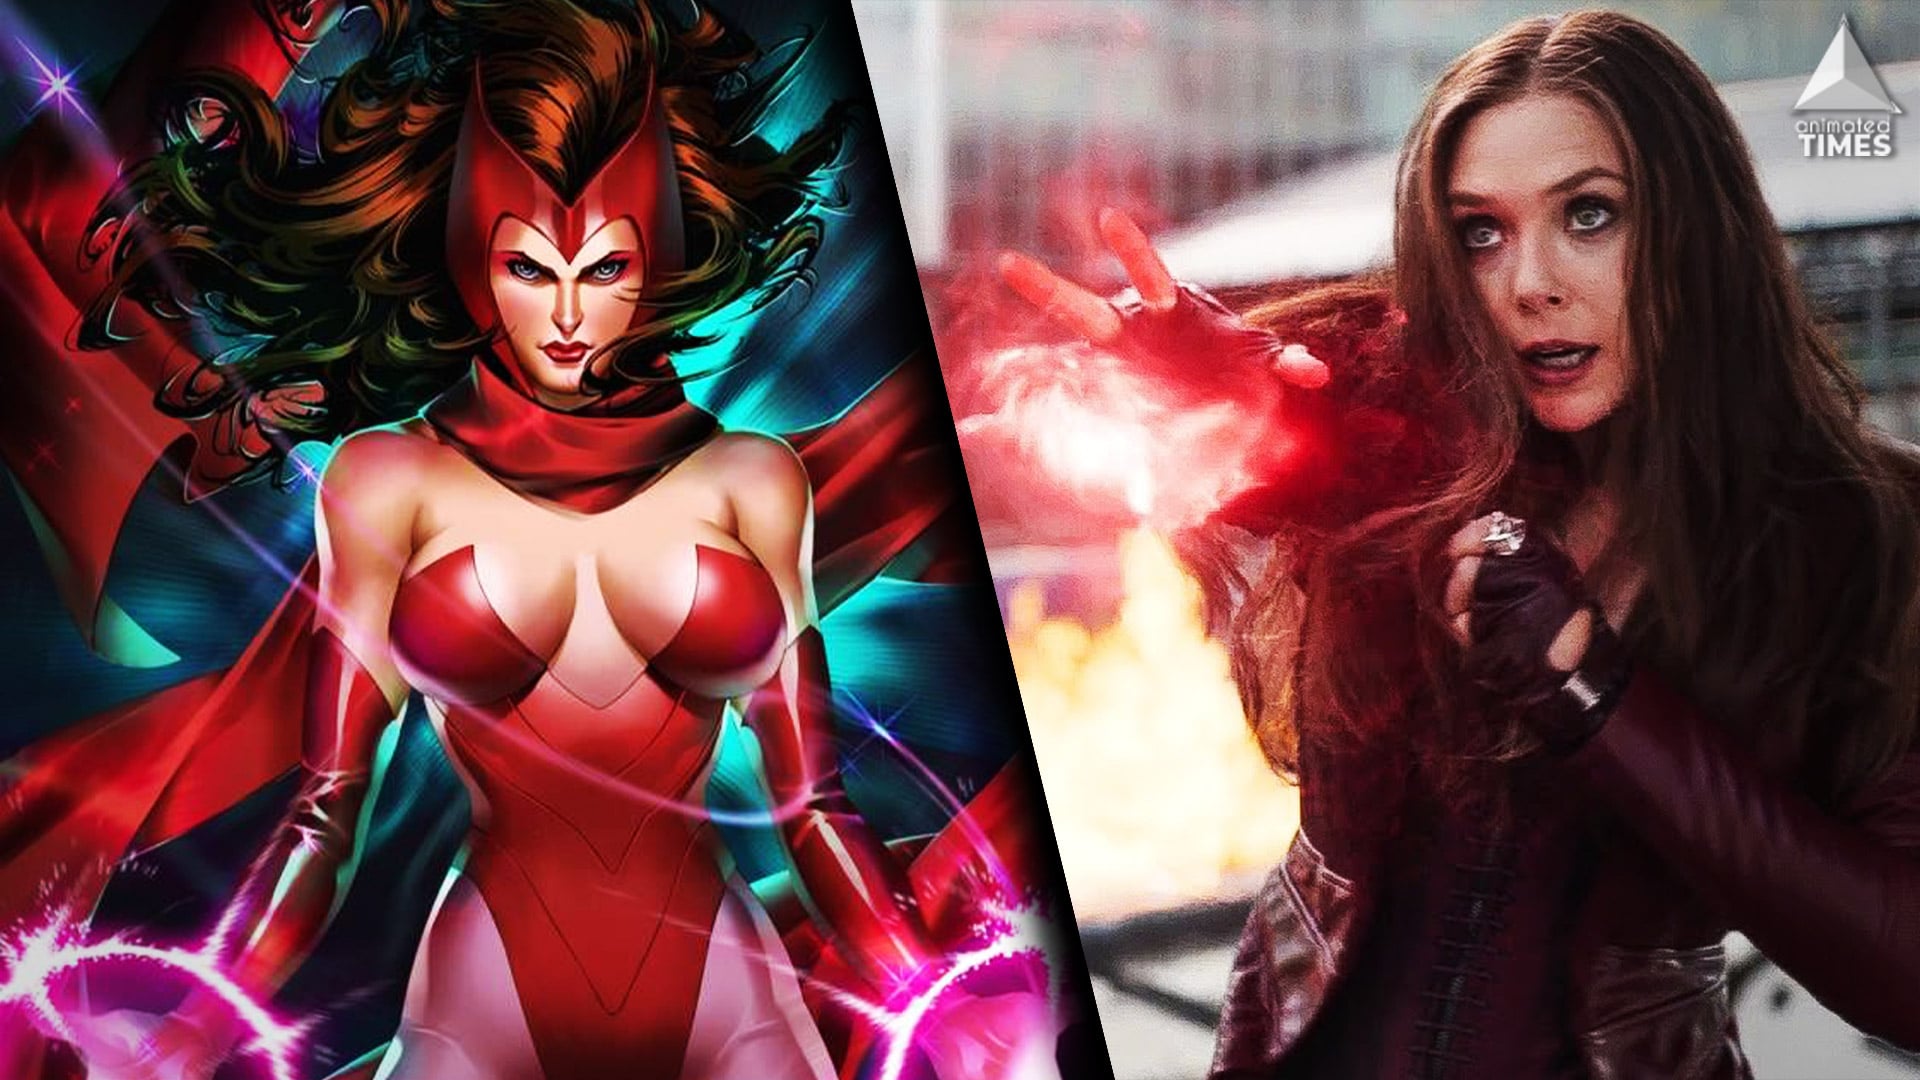 What Makes Scarlet Witch The Most Powerful Avenger?